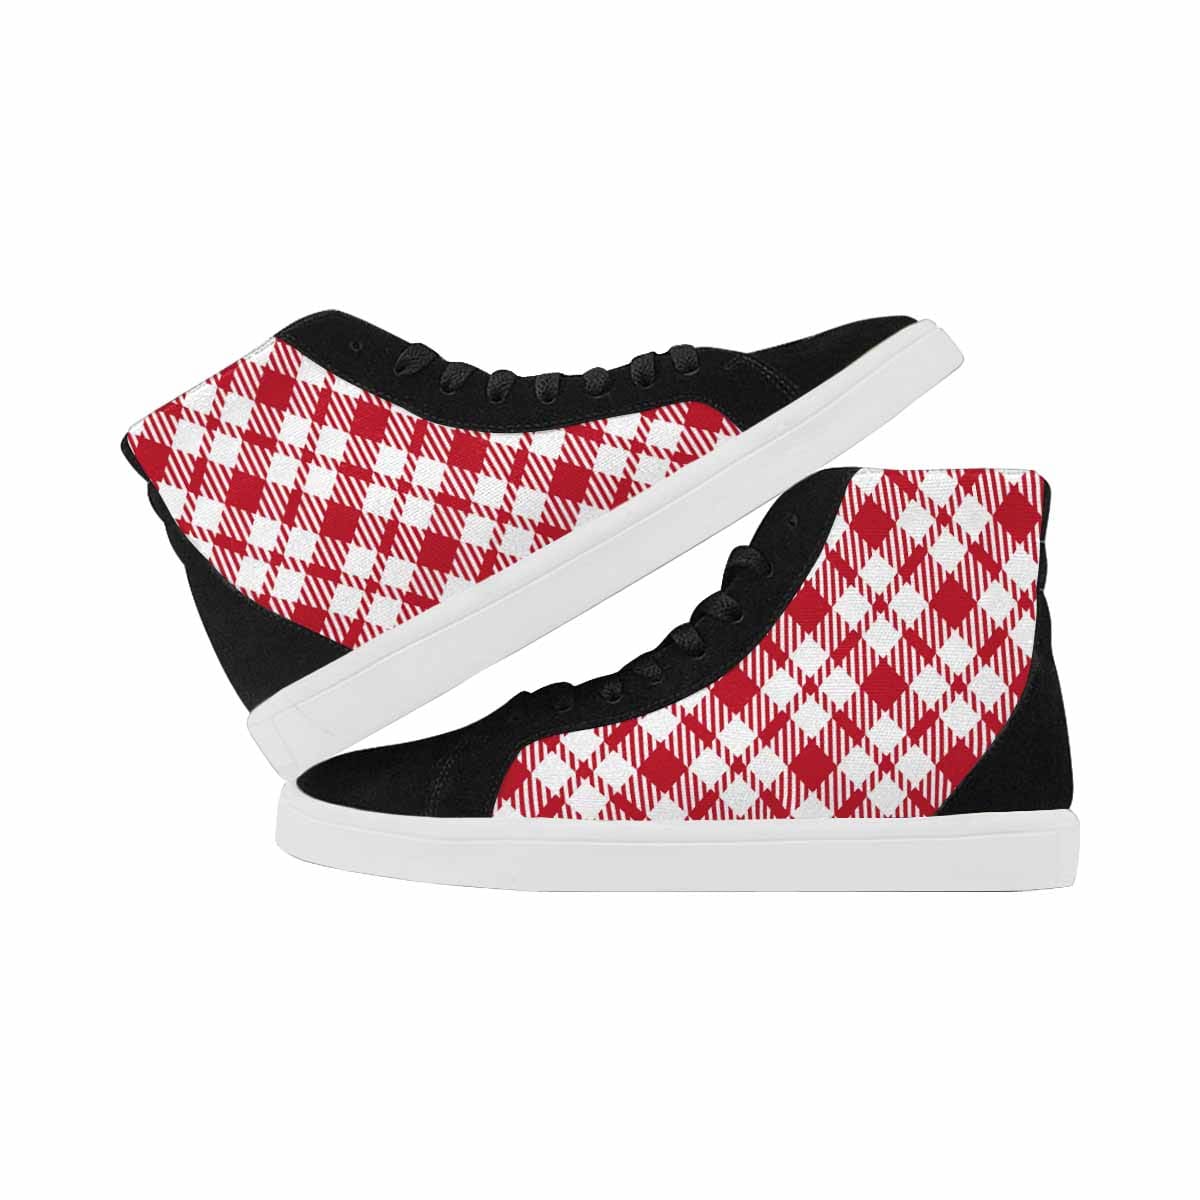 Sneakers For Women, Buffalo Plaid Red And White - High Top Sports Shoes-3